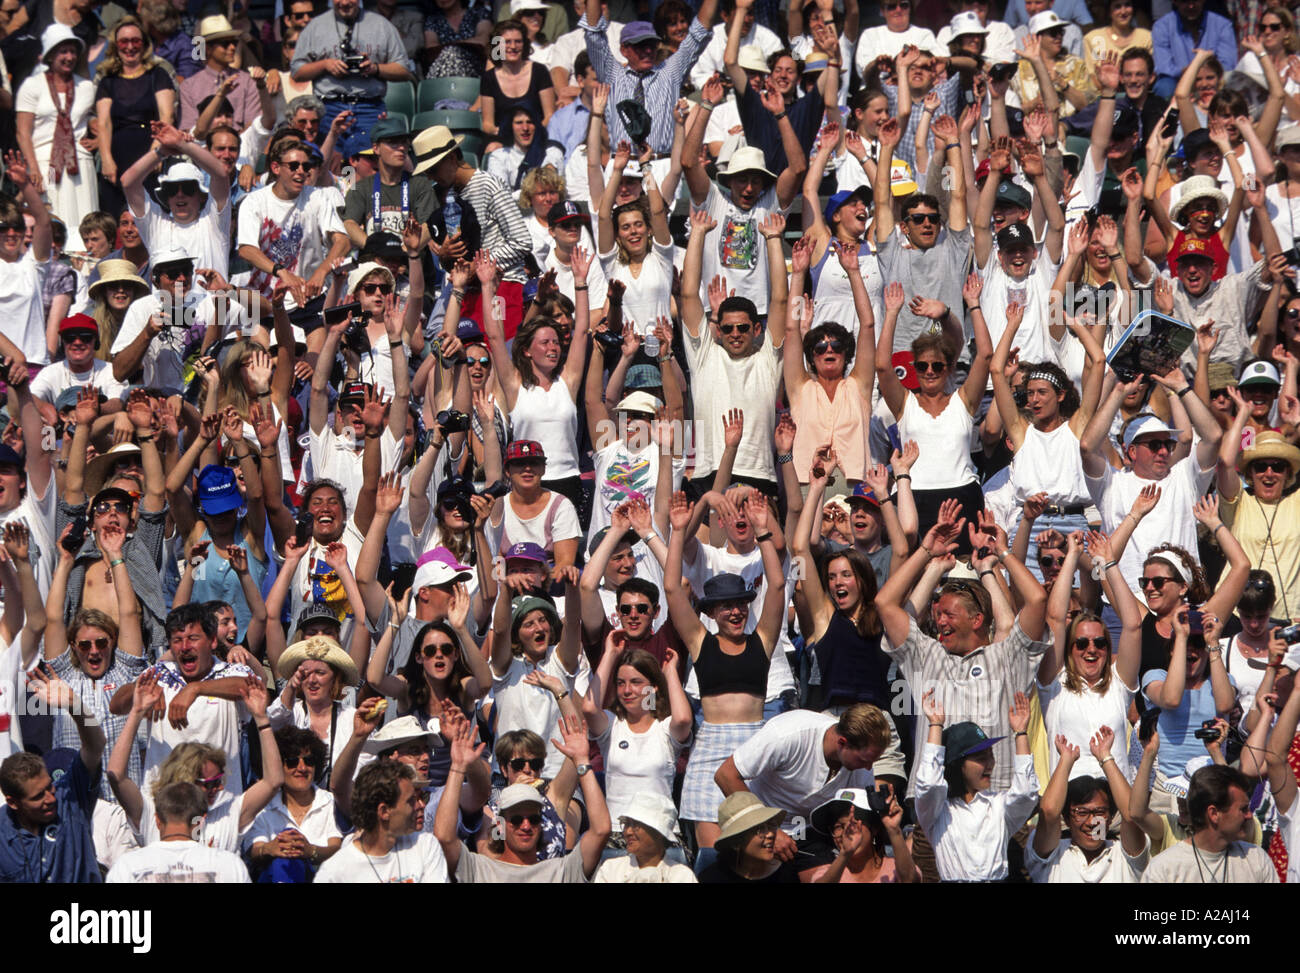 People in the crowd raise their arms in the air performing a Mexican Wave during a tennis match Stock Photo